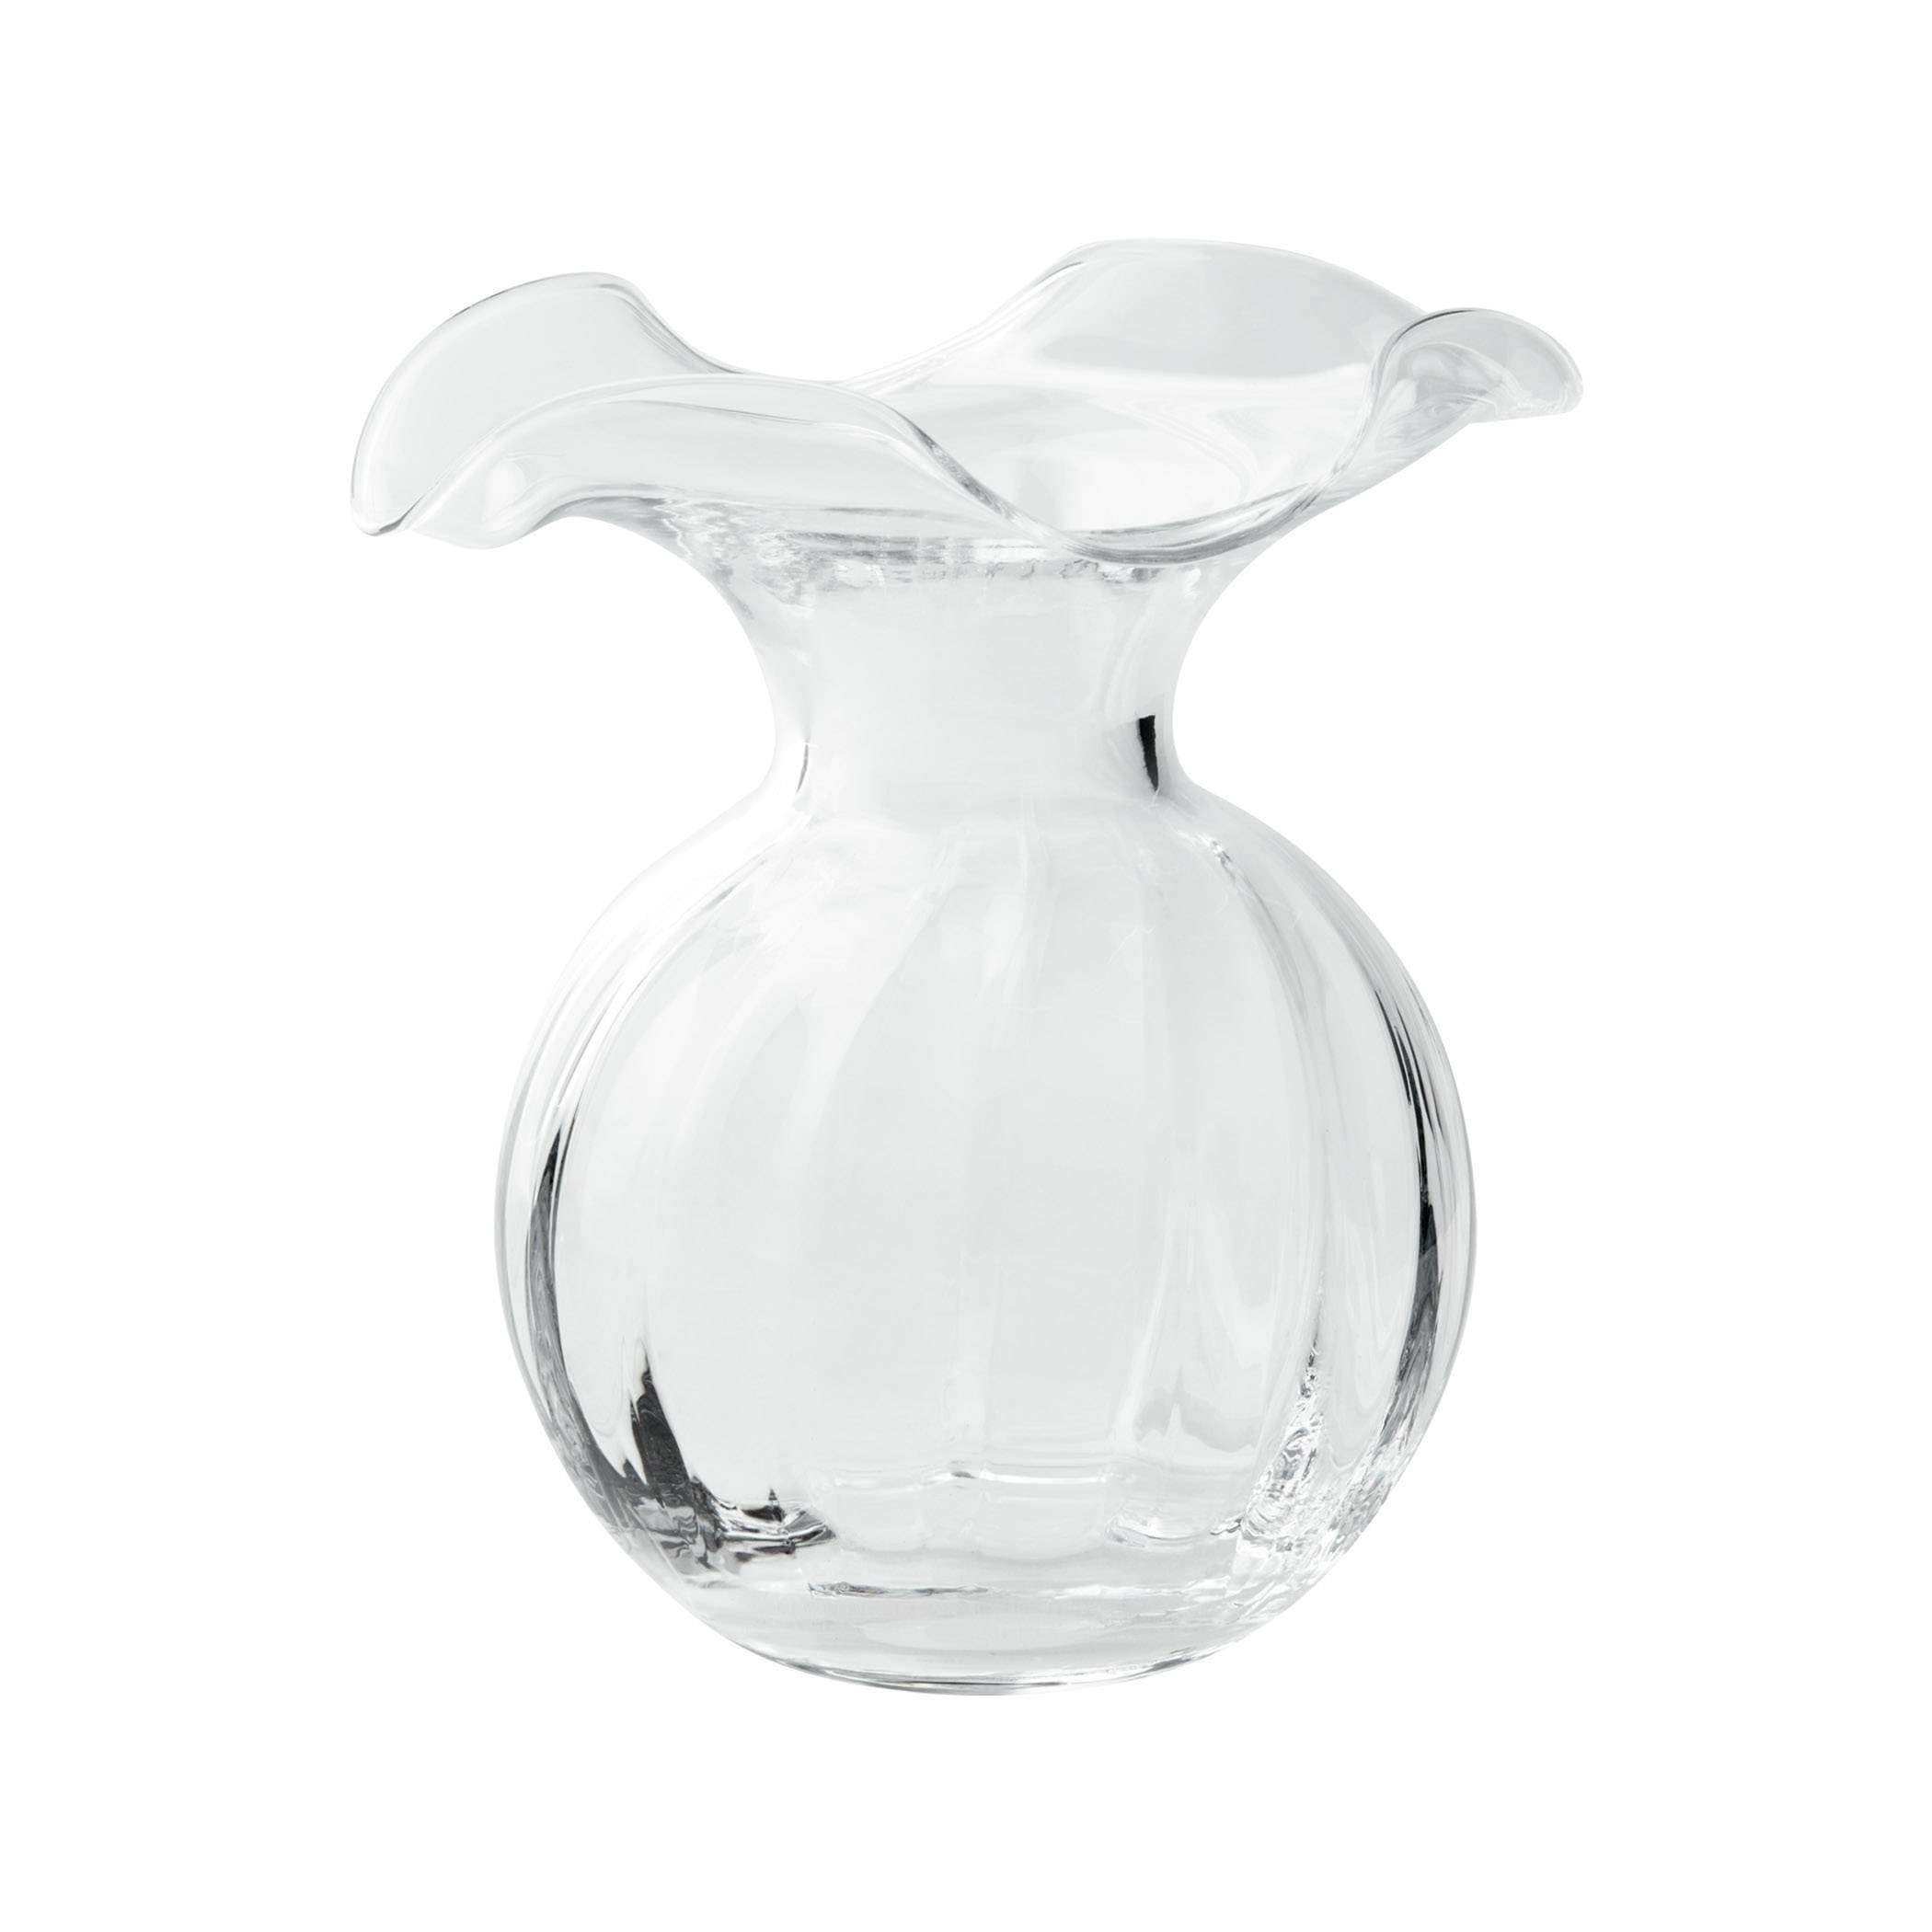 Vietri Hibiscus Glass Fluted Vase - 3 Available Sizes